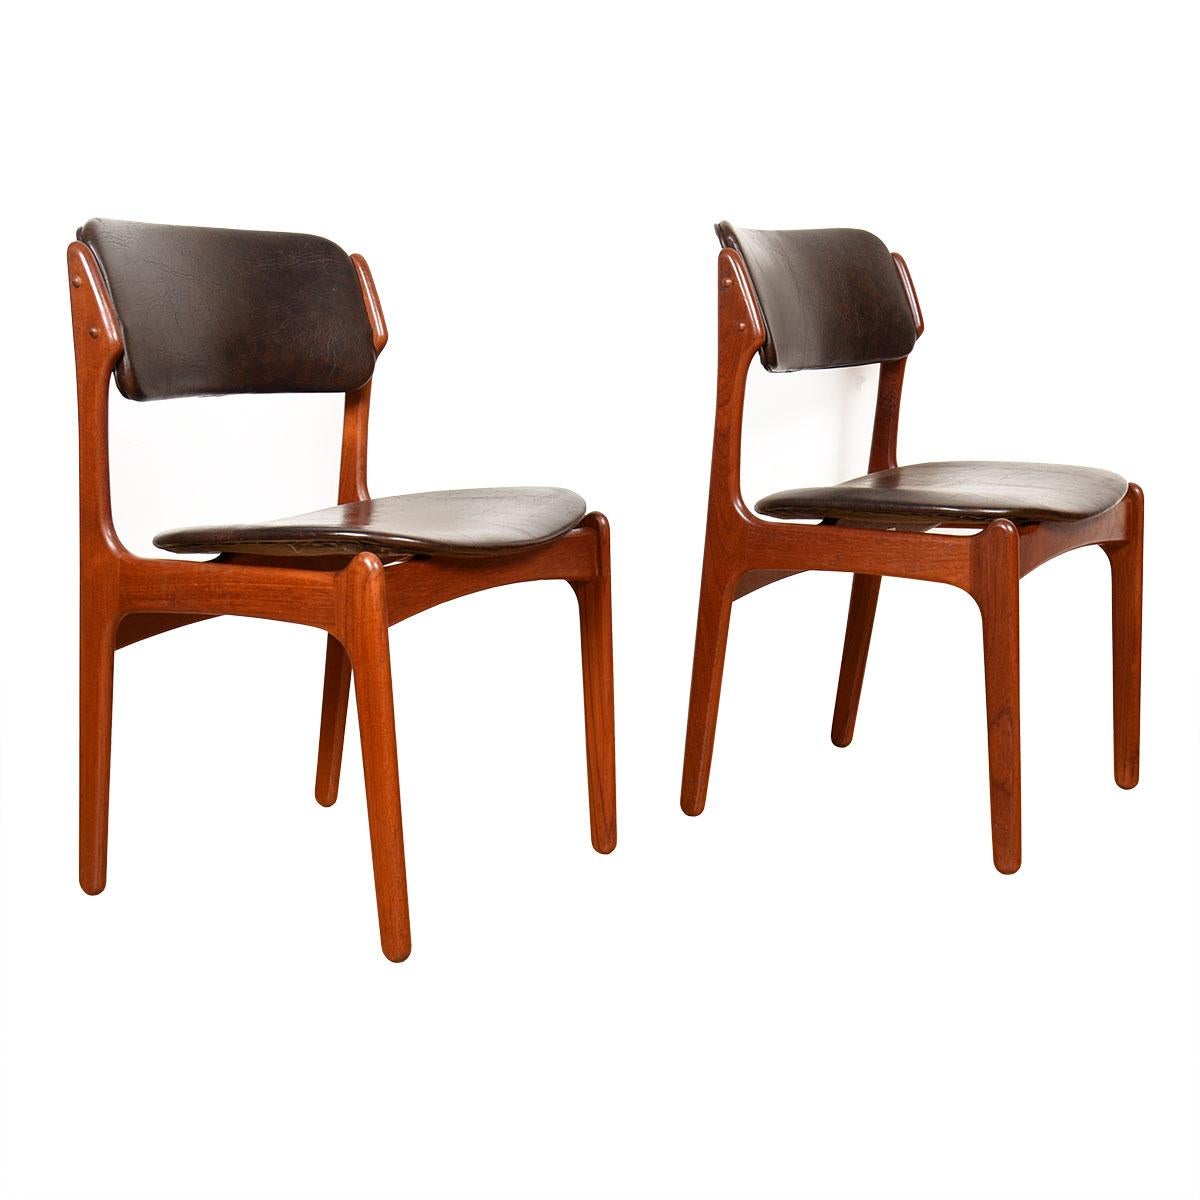 Pair of Danish Teak Dining Chairs in Chocolate Brown by Erik Buch

Additional information:
Material: Teak, Upholstery
Featured at Kensington
A wonderful pair of Erik Buch Danish Modern teak dining chairs with a brown upholstery. Designed by